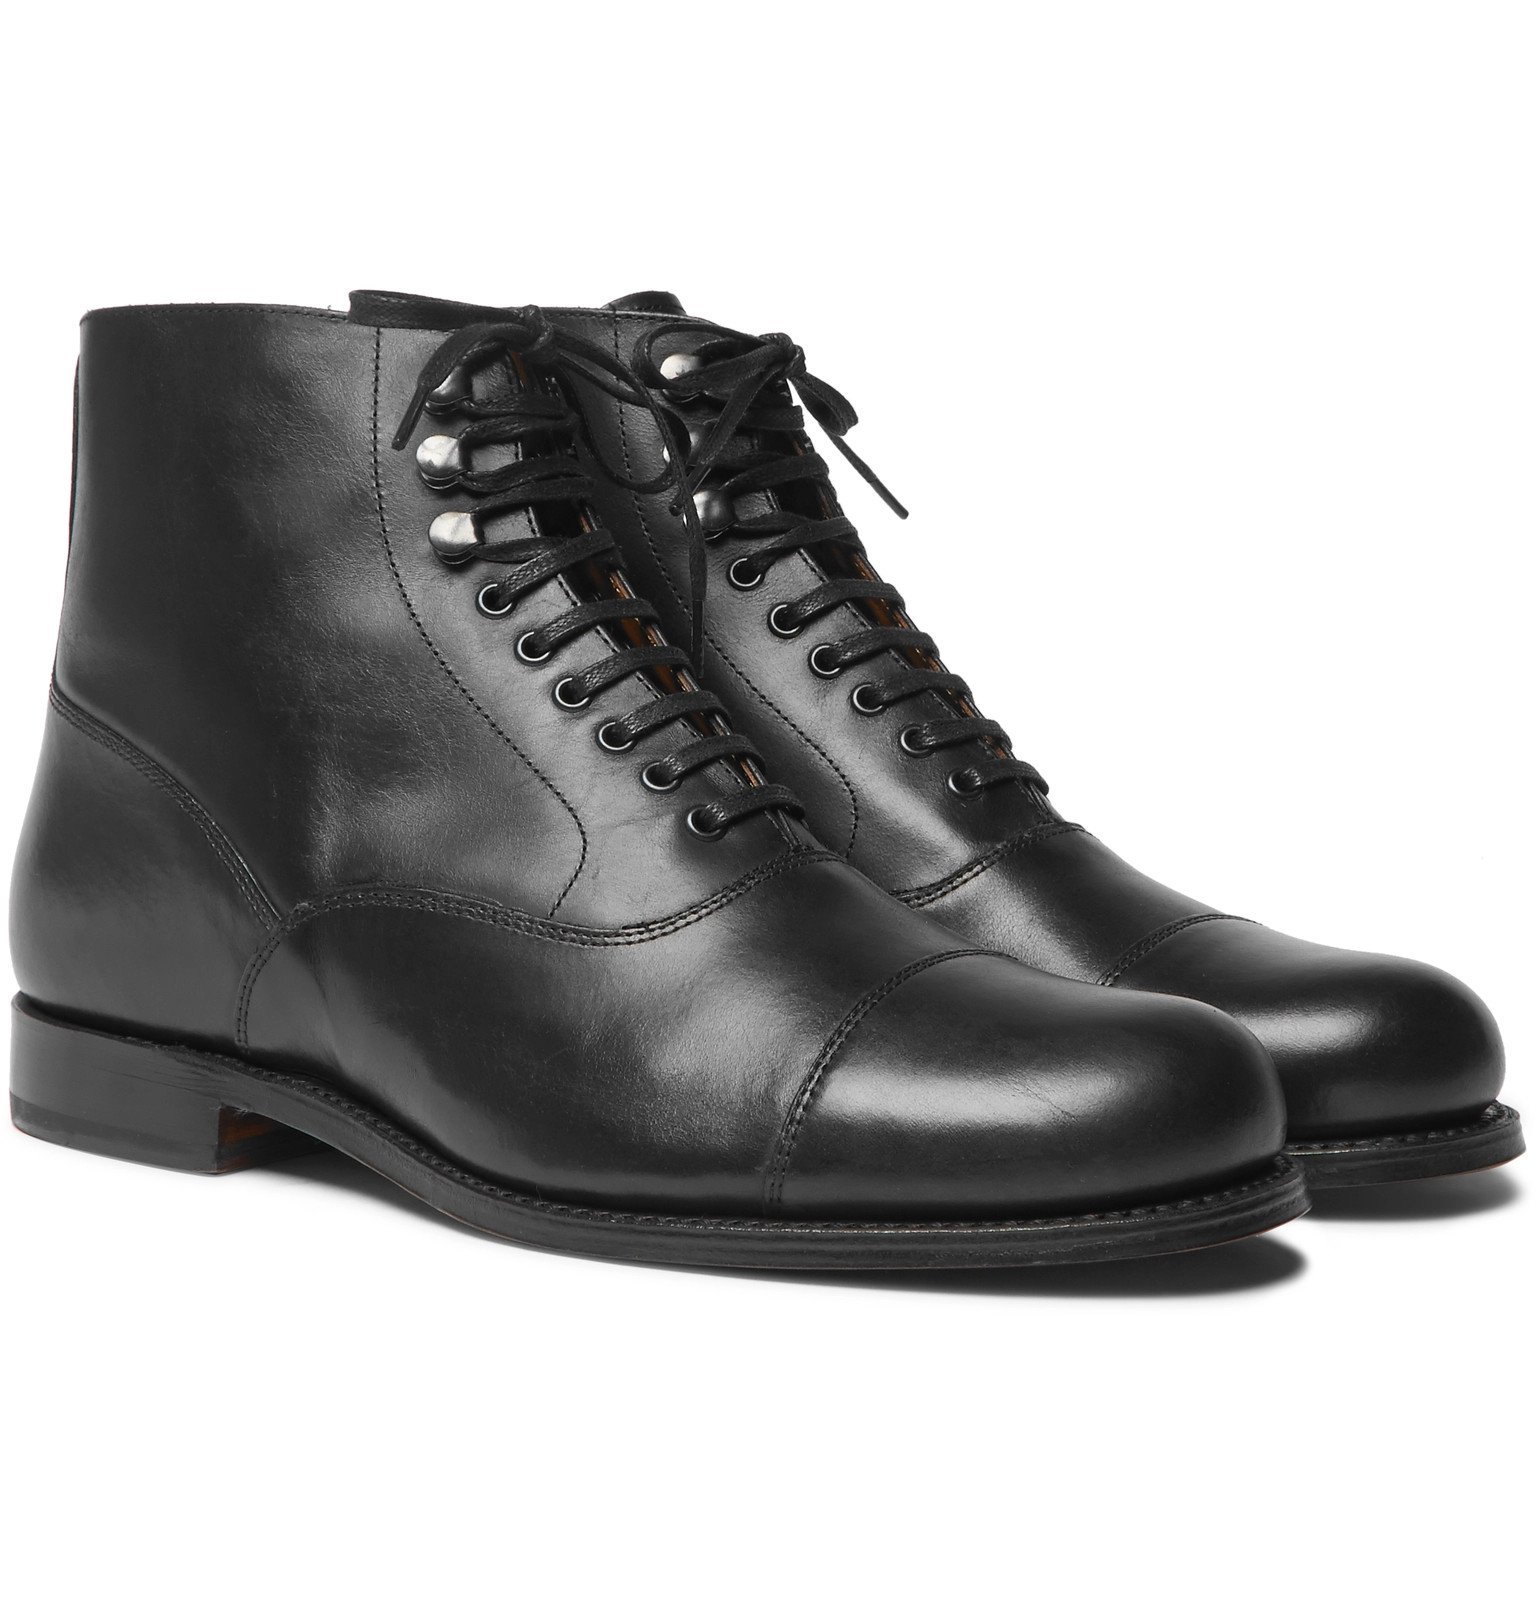 Grenson - Leander Cap-Toe Leather Boots 